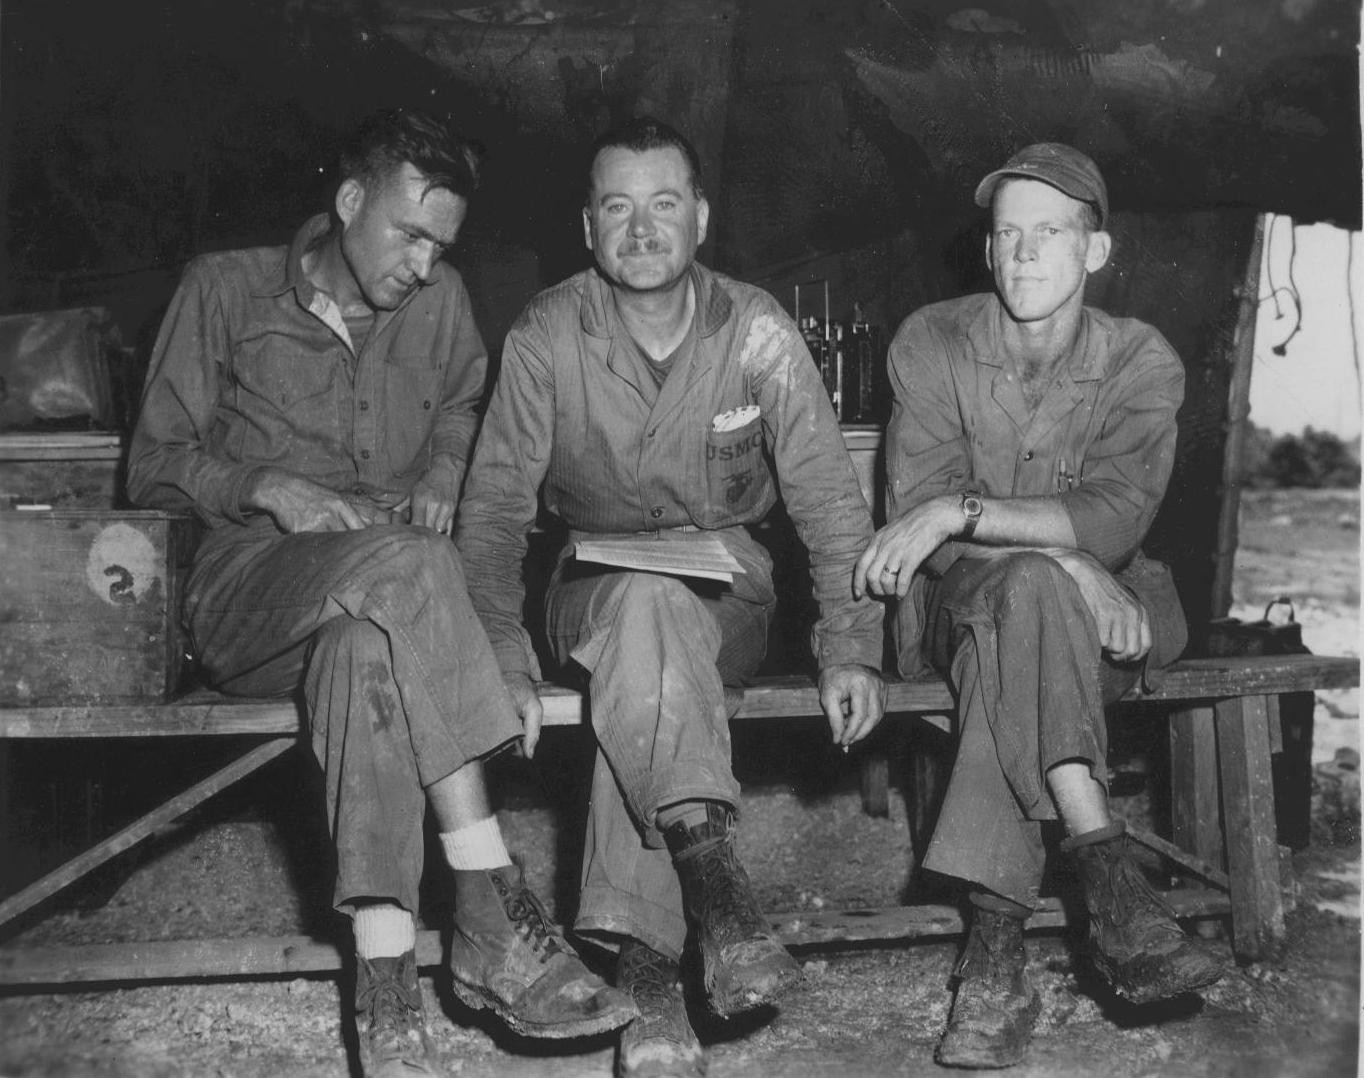 Public relations personnel of US Marine Airfield Group 31 Sgt Claude Canup, Sgt James Driscoll, and TSgt Charles Corkran, Yontan Airfield, Okinawa, 1945